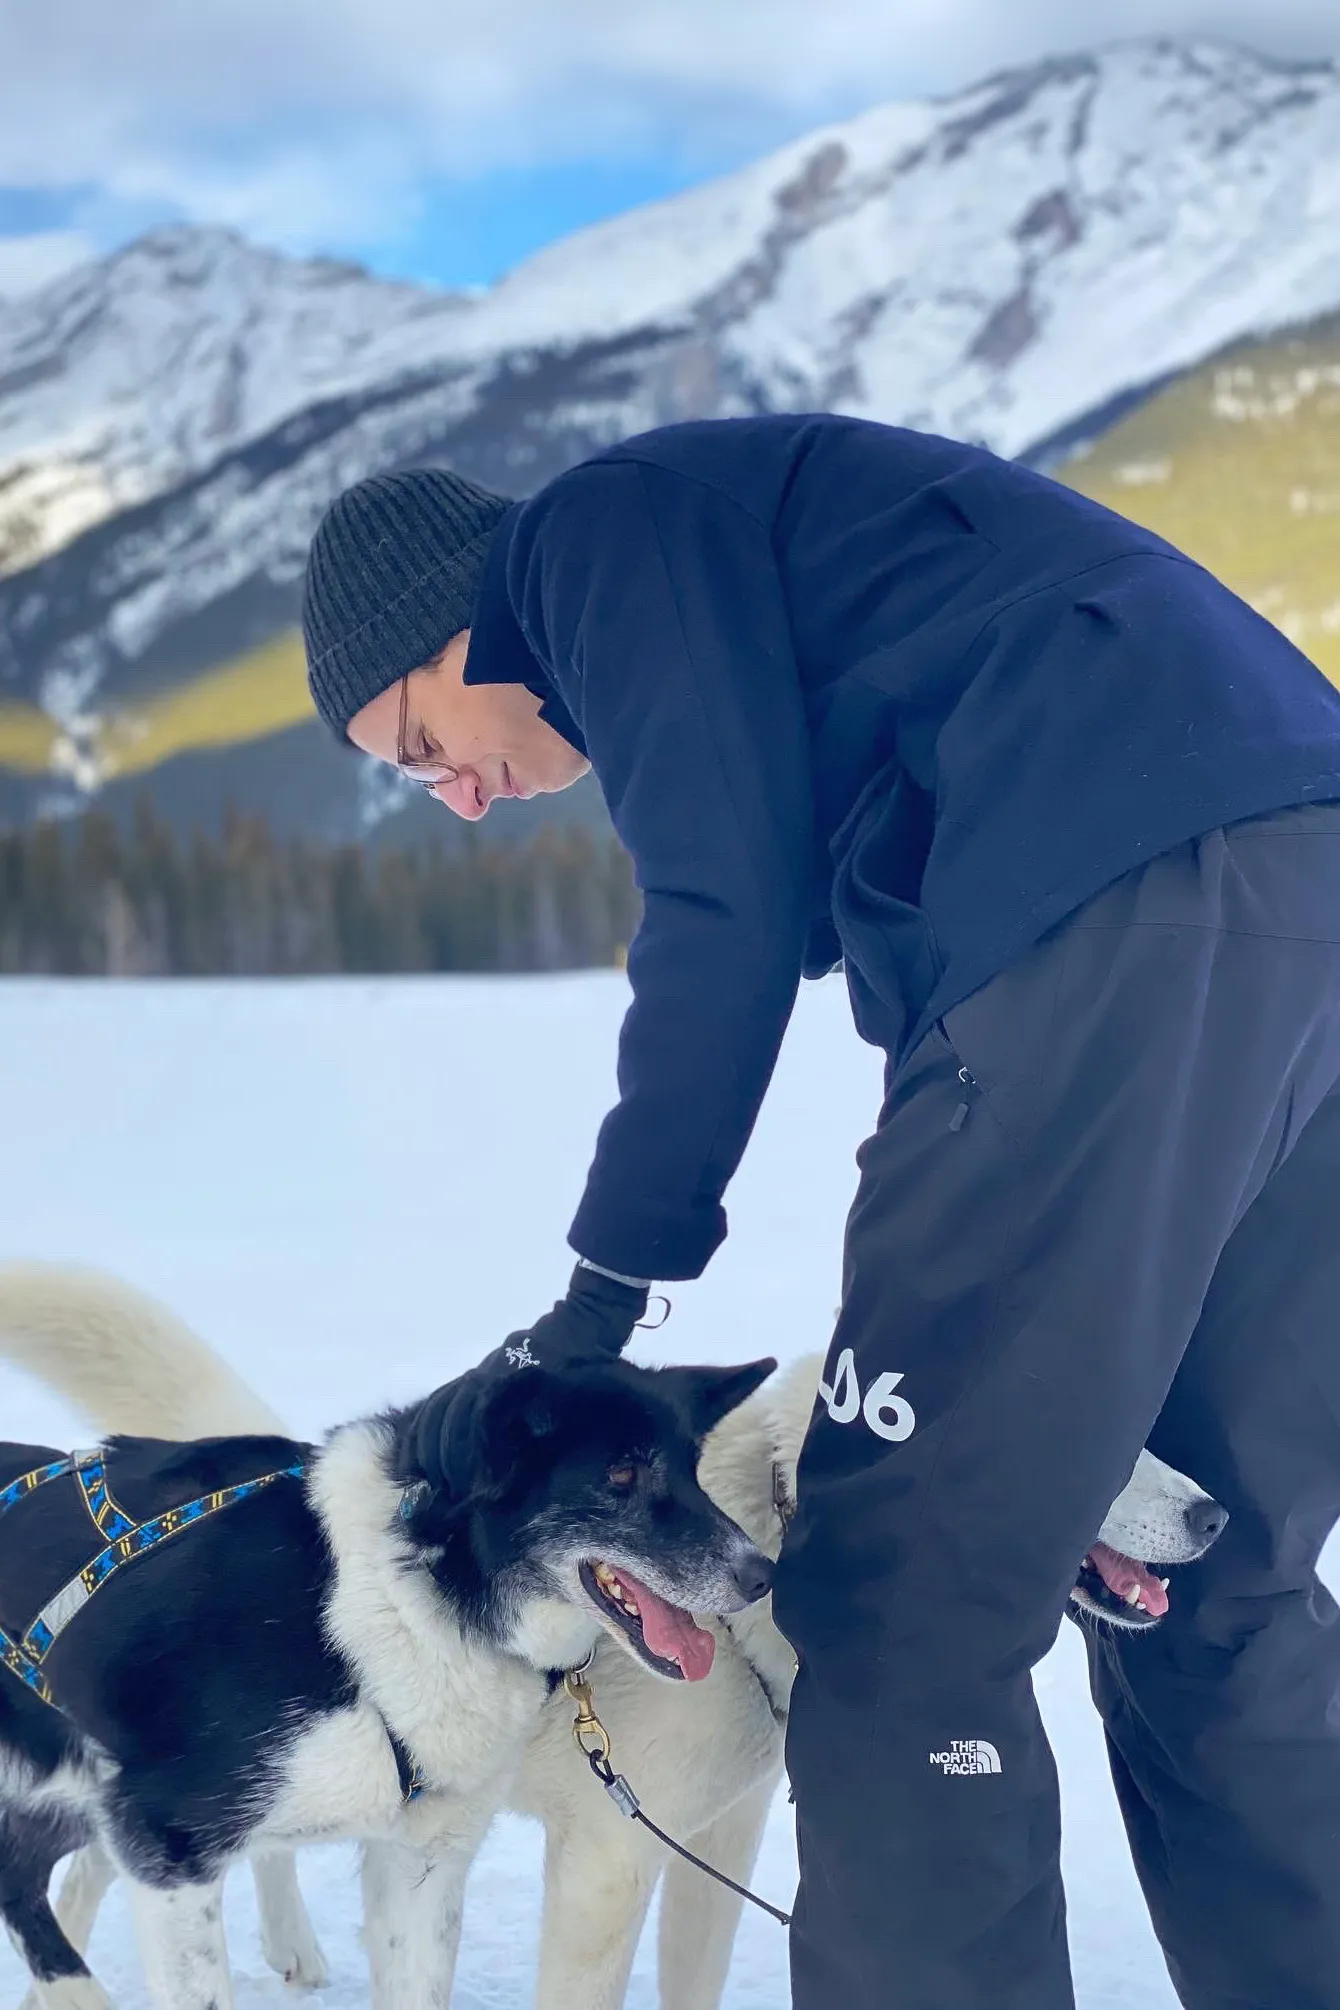 A picture of me petting two good dogs in a snowy landscape in Banff, Canada.